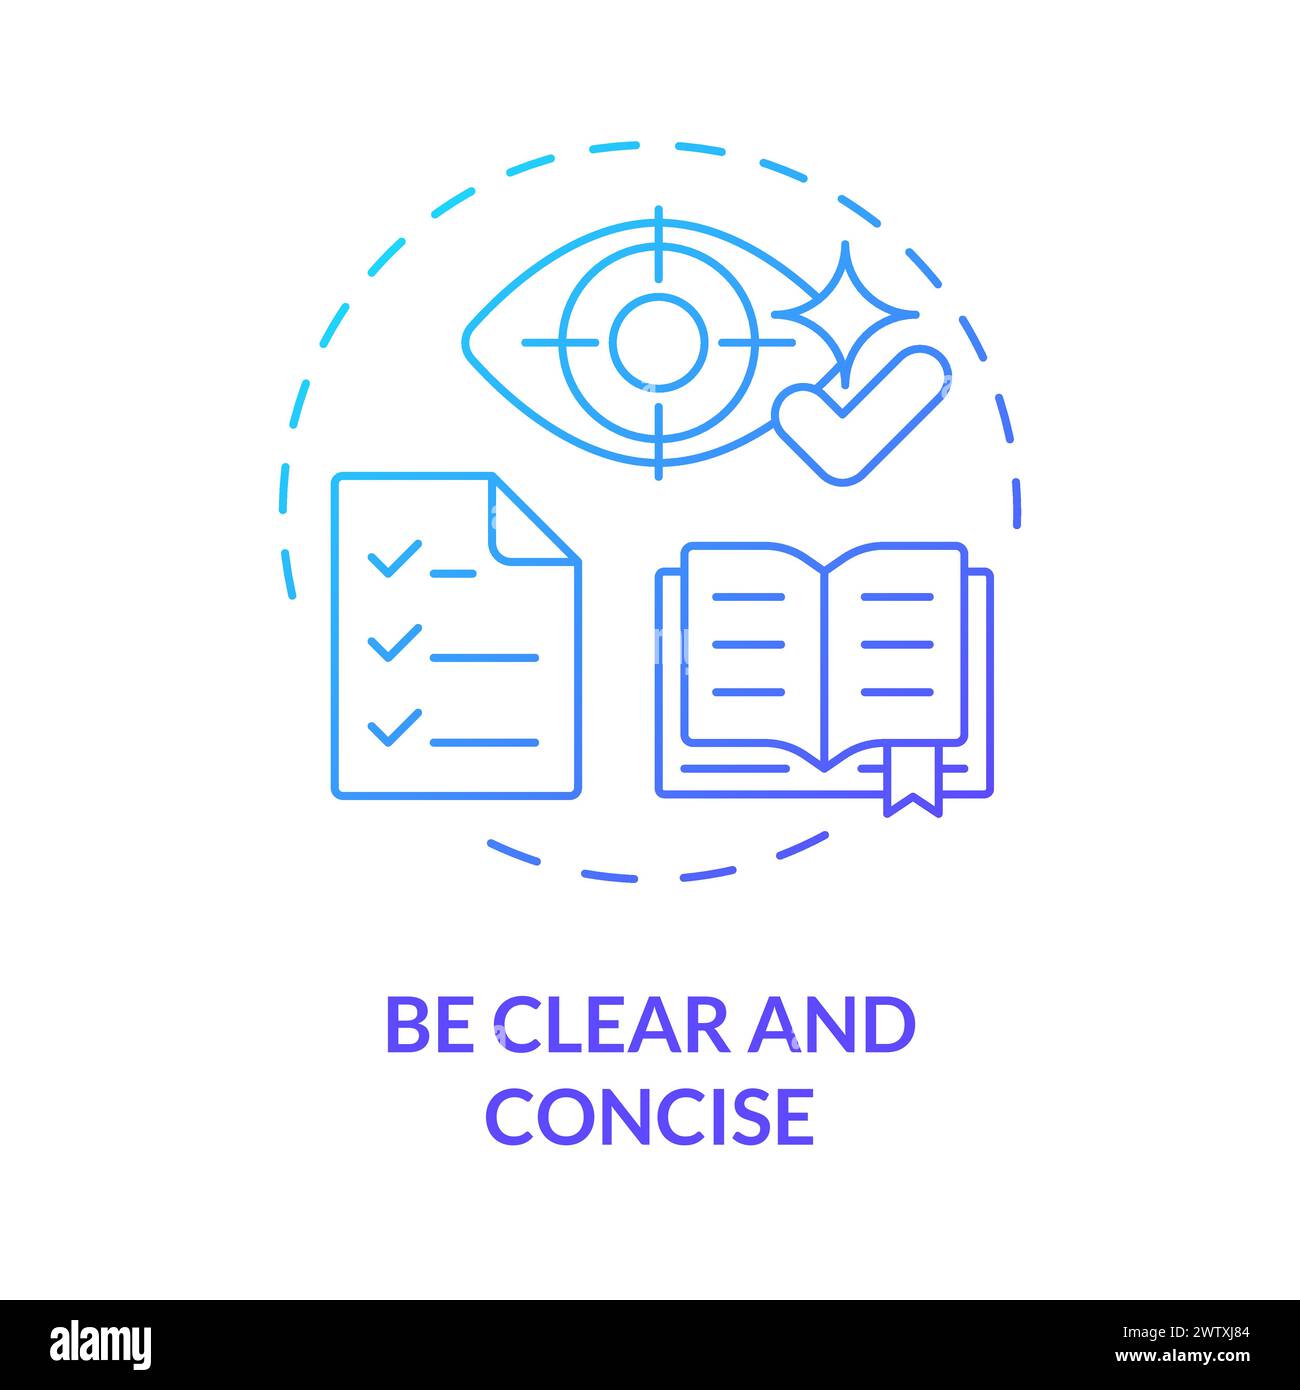 Be clear and concise blue gradient concept icon Stock Vector